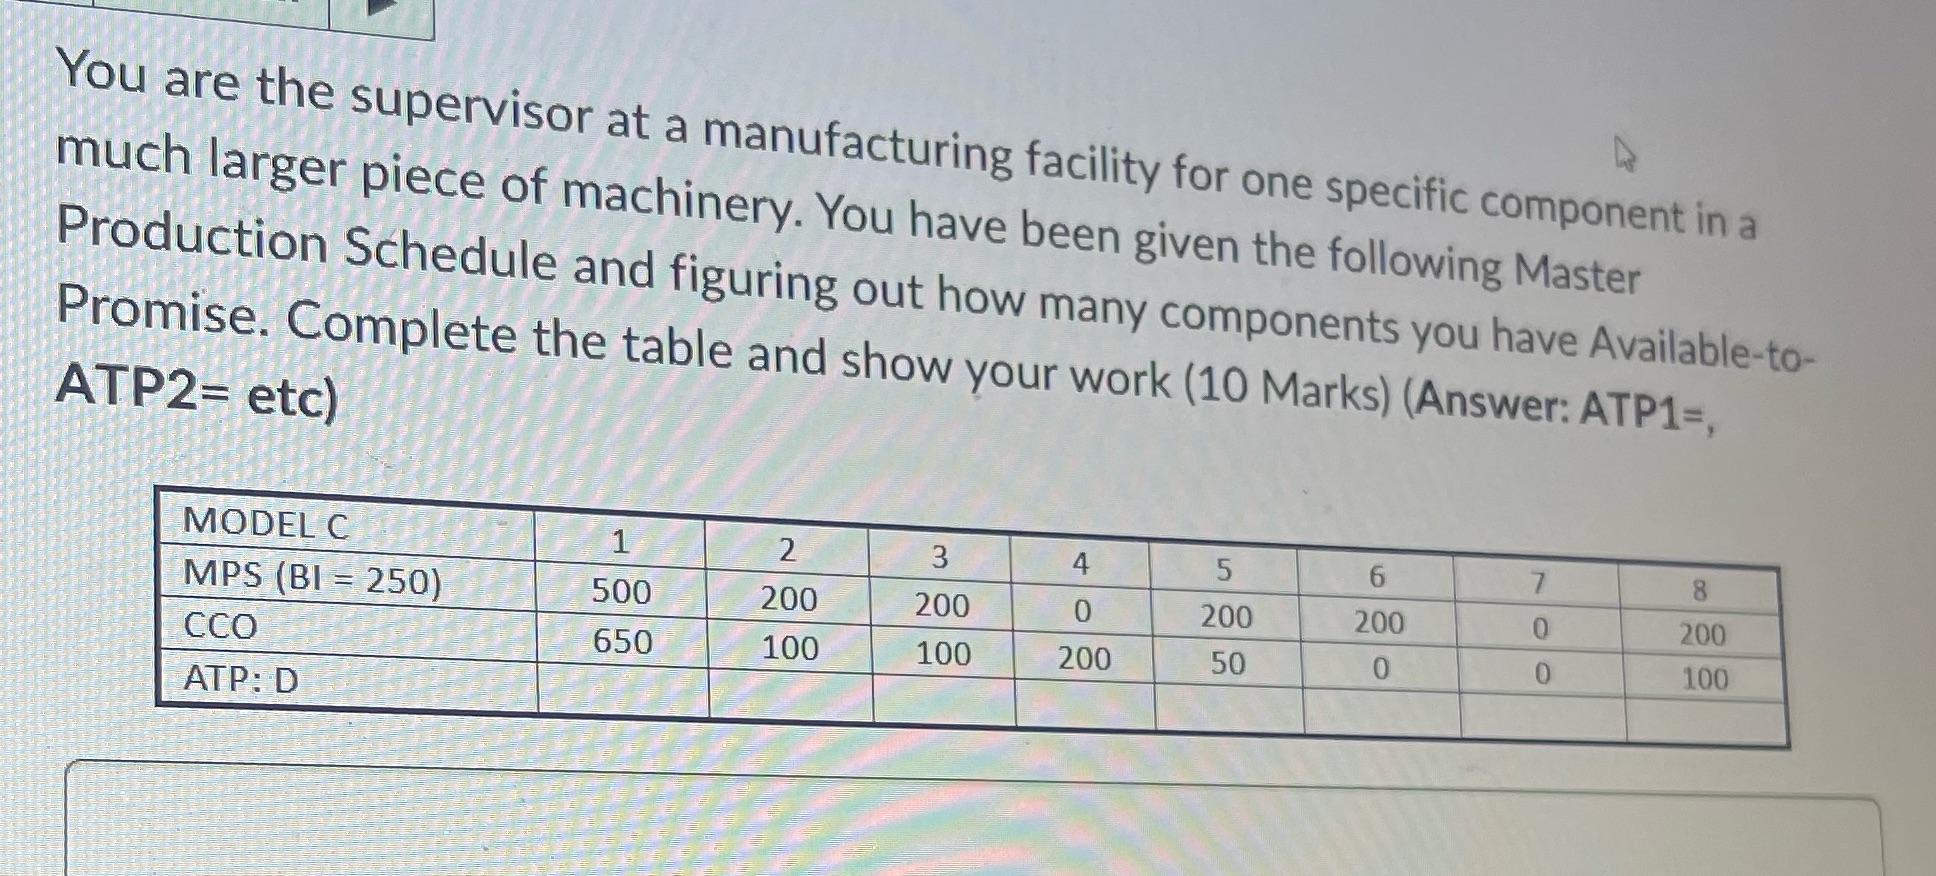 You are the supervisor at a manufacturing facility for one specific component in a much larger piece of